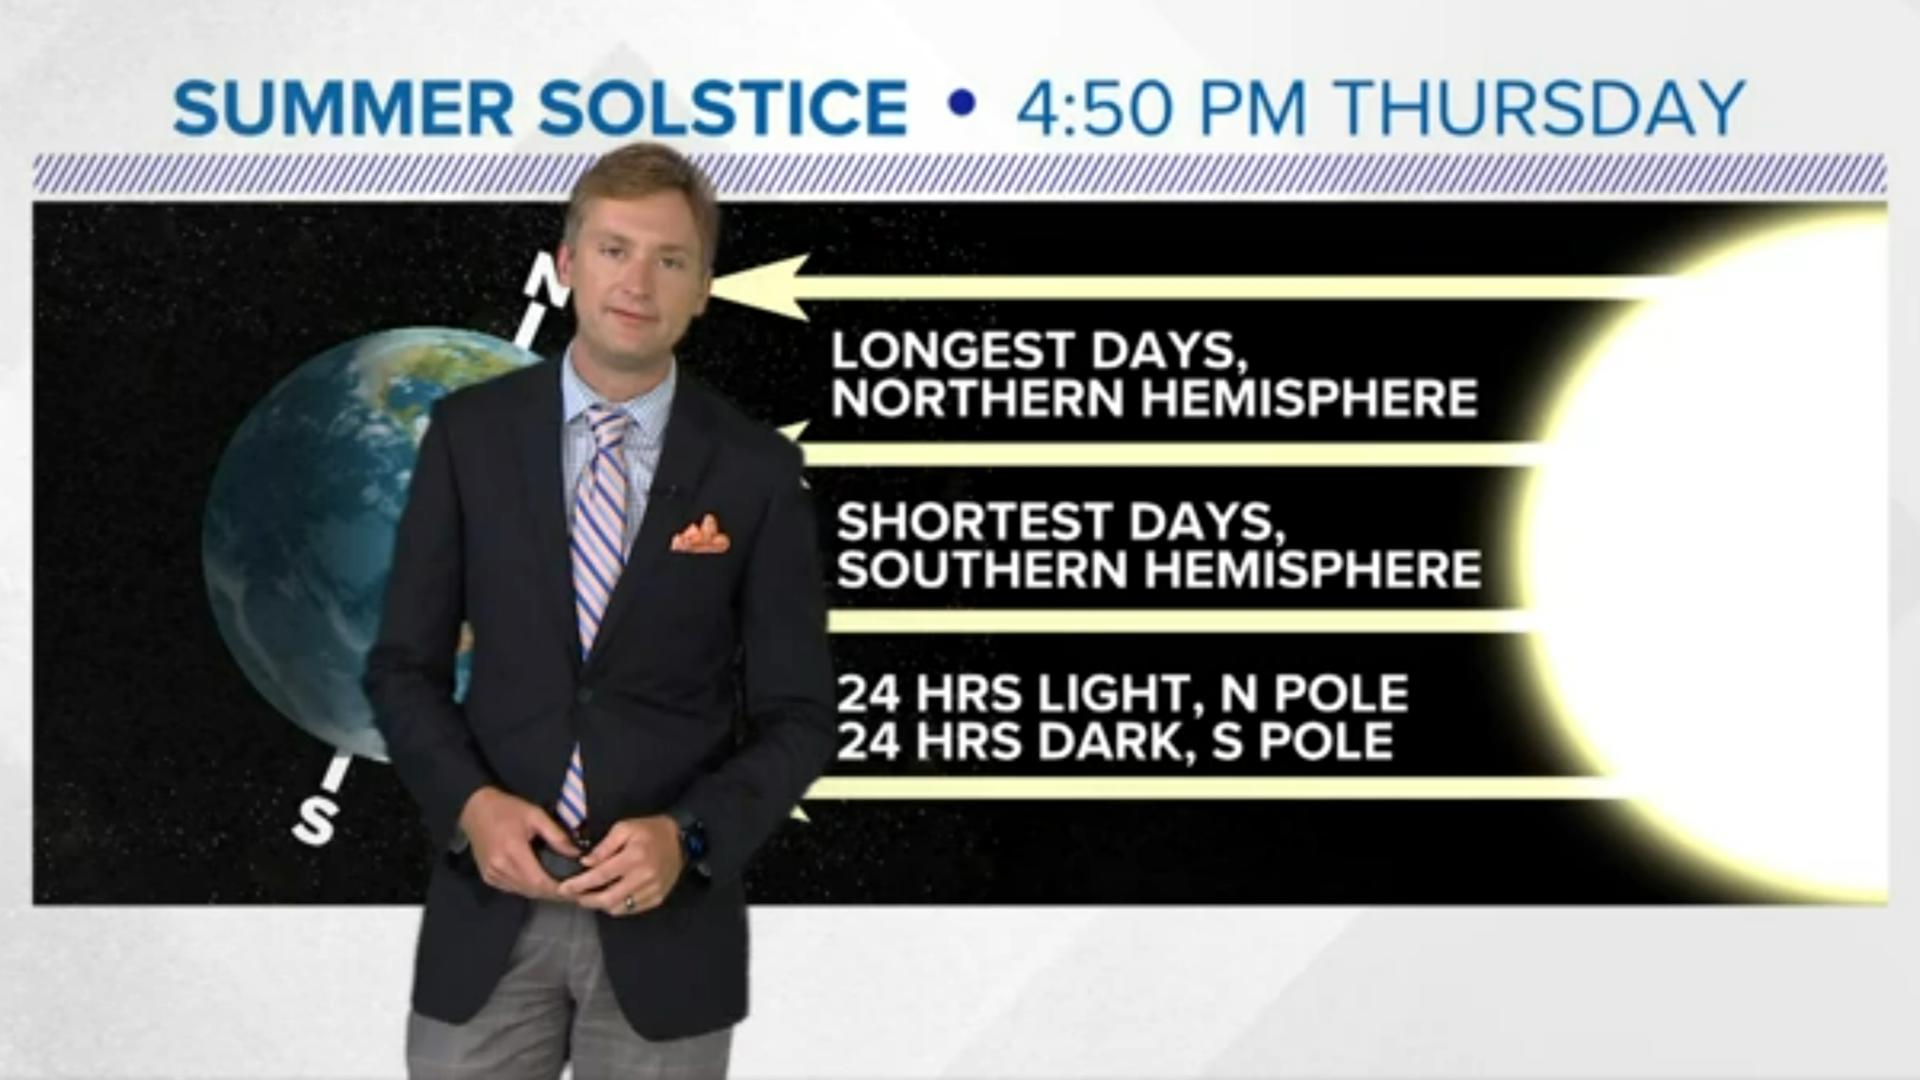 The solstice marks the official start of summer and is the longest day and shortest night of the year because of how the earth moves around the sun.